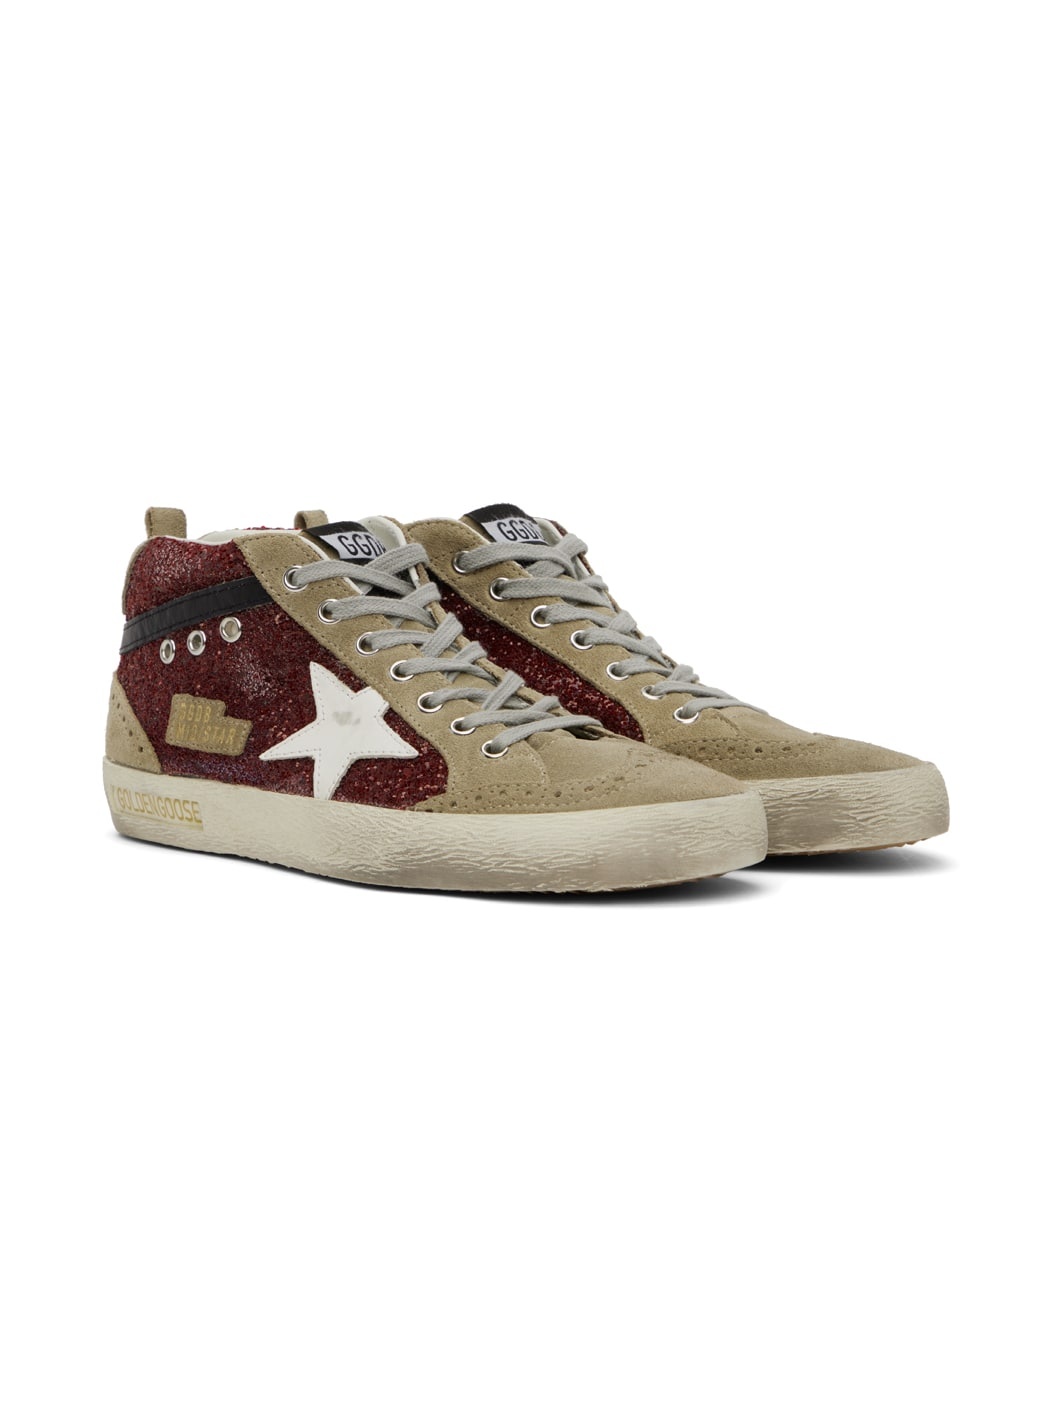 Taupe & Burgundy Mid Star Sneakers - 4